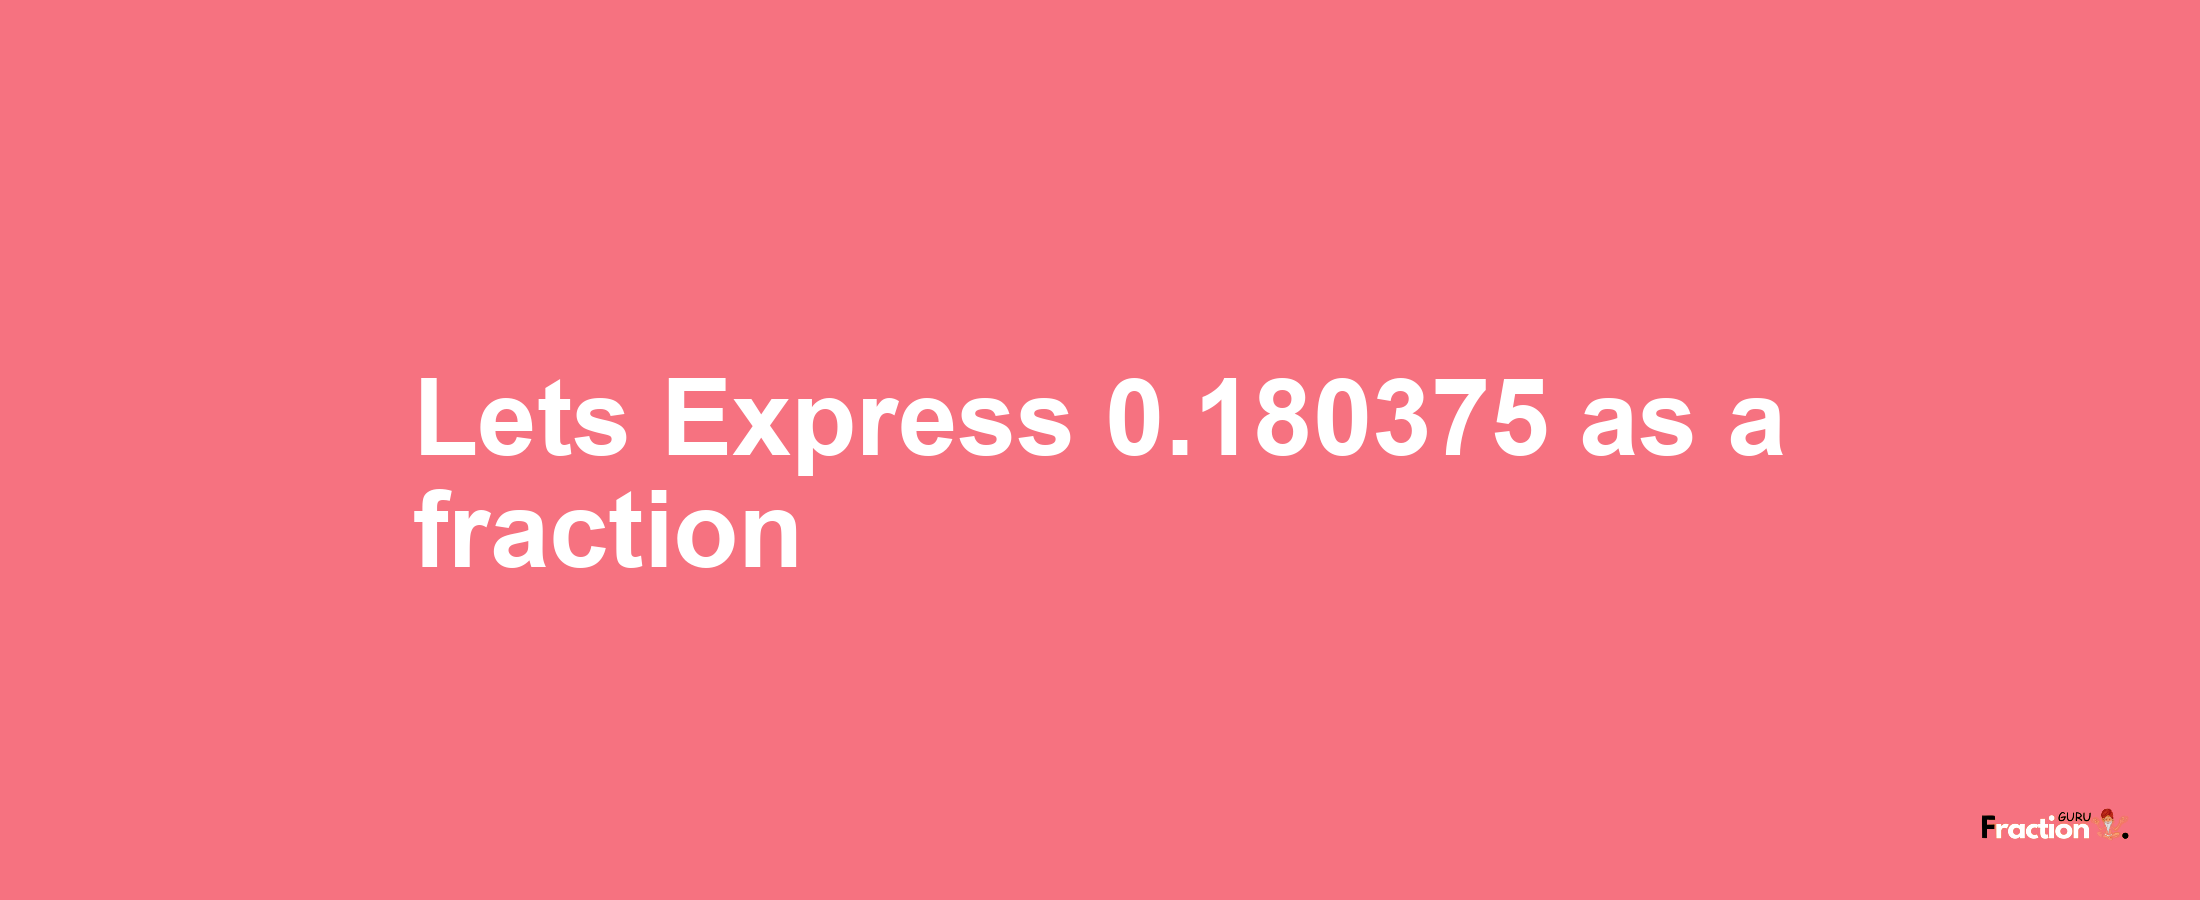 Lets Express 0.180375 as afraction